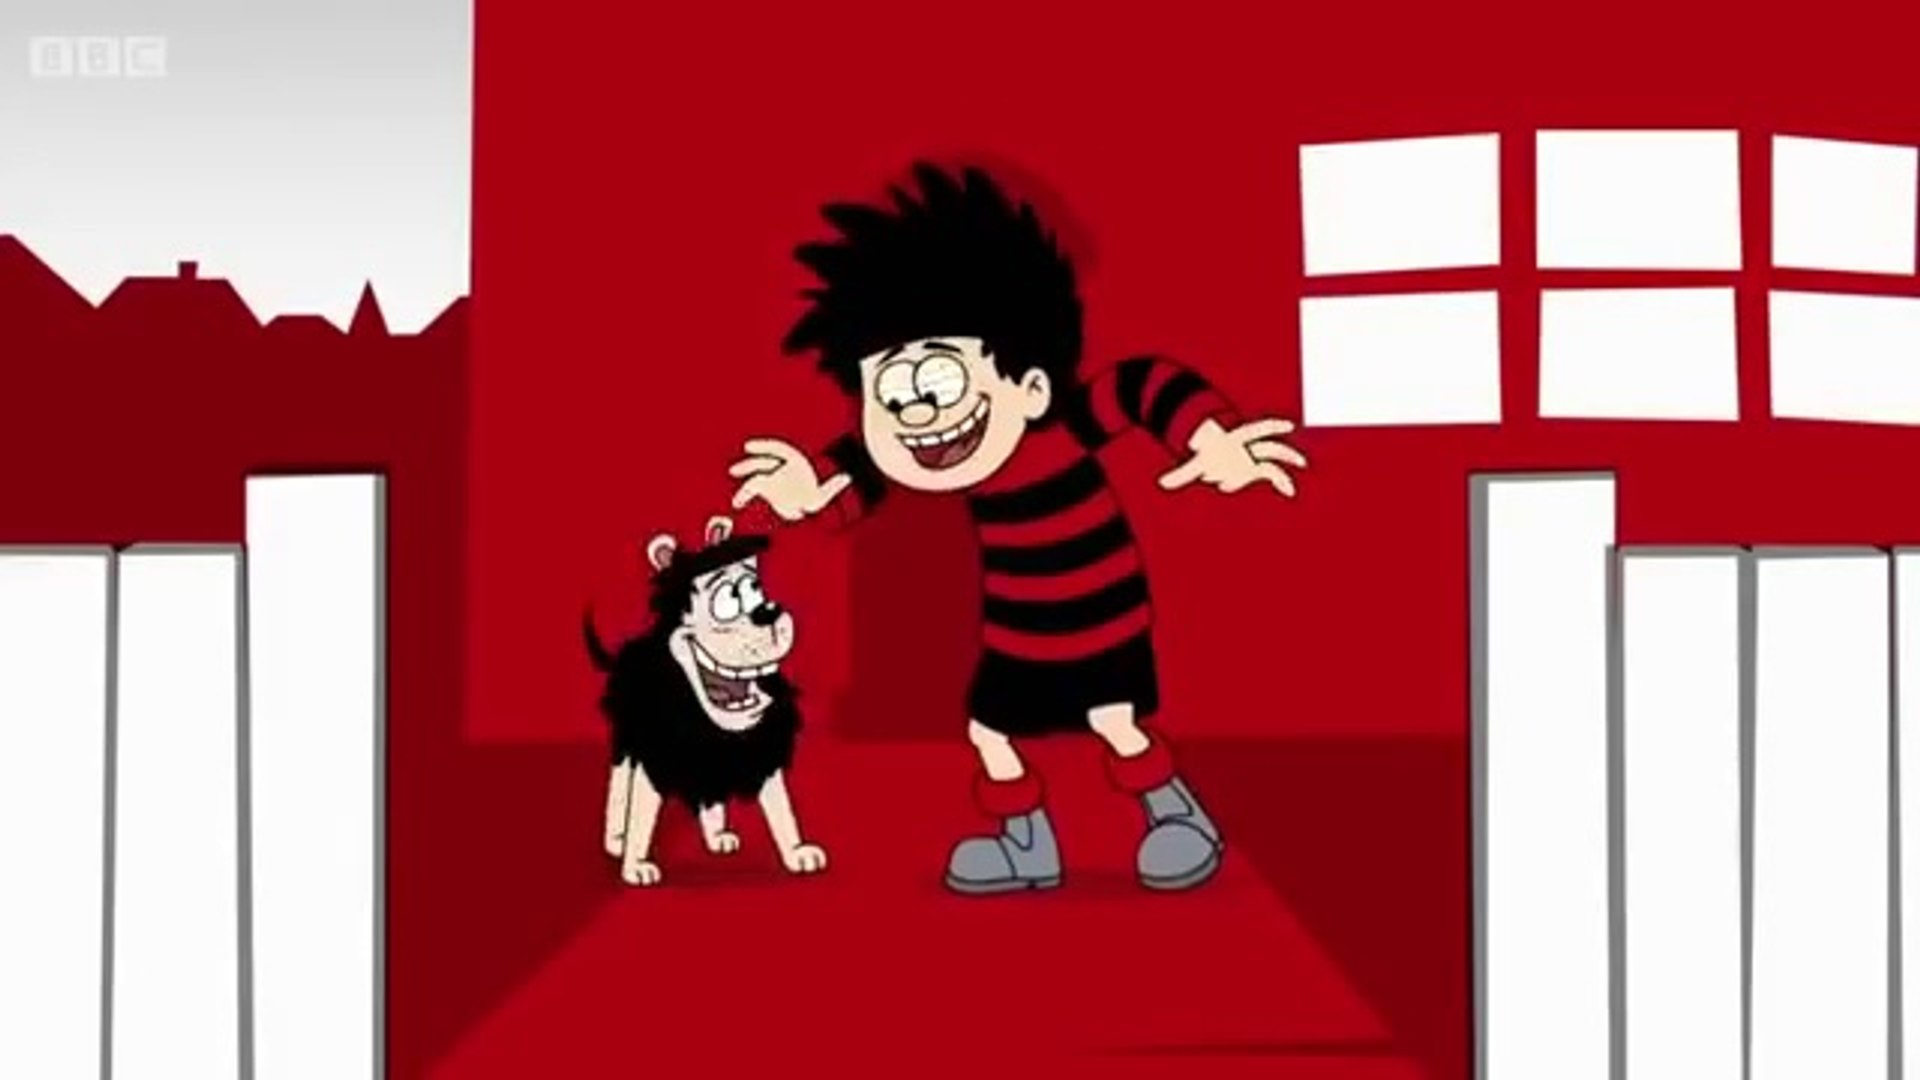 Denis the menace show. Dennis the Menace and Gnasher. Mike the Menace. Dennis the Menace movie. Dennis the Menace Macabre.